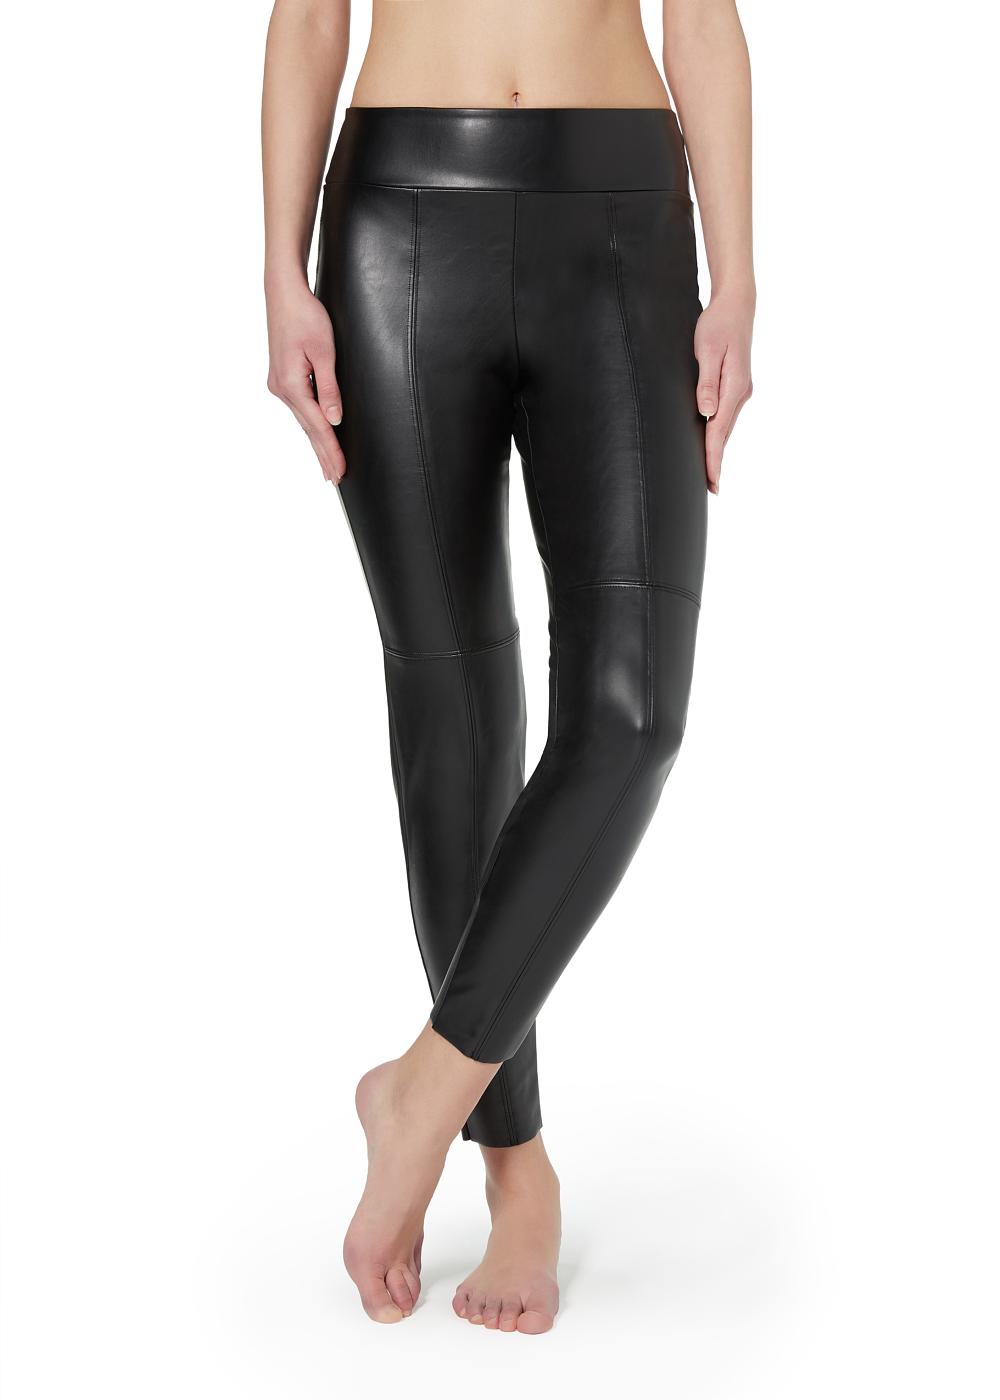 Don't Miss Your Chance To Score Calzedonia's Iconic Faux Leather Leggings  For Just $19.95 - SHEfinds